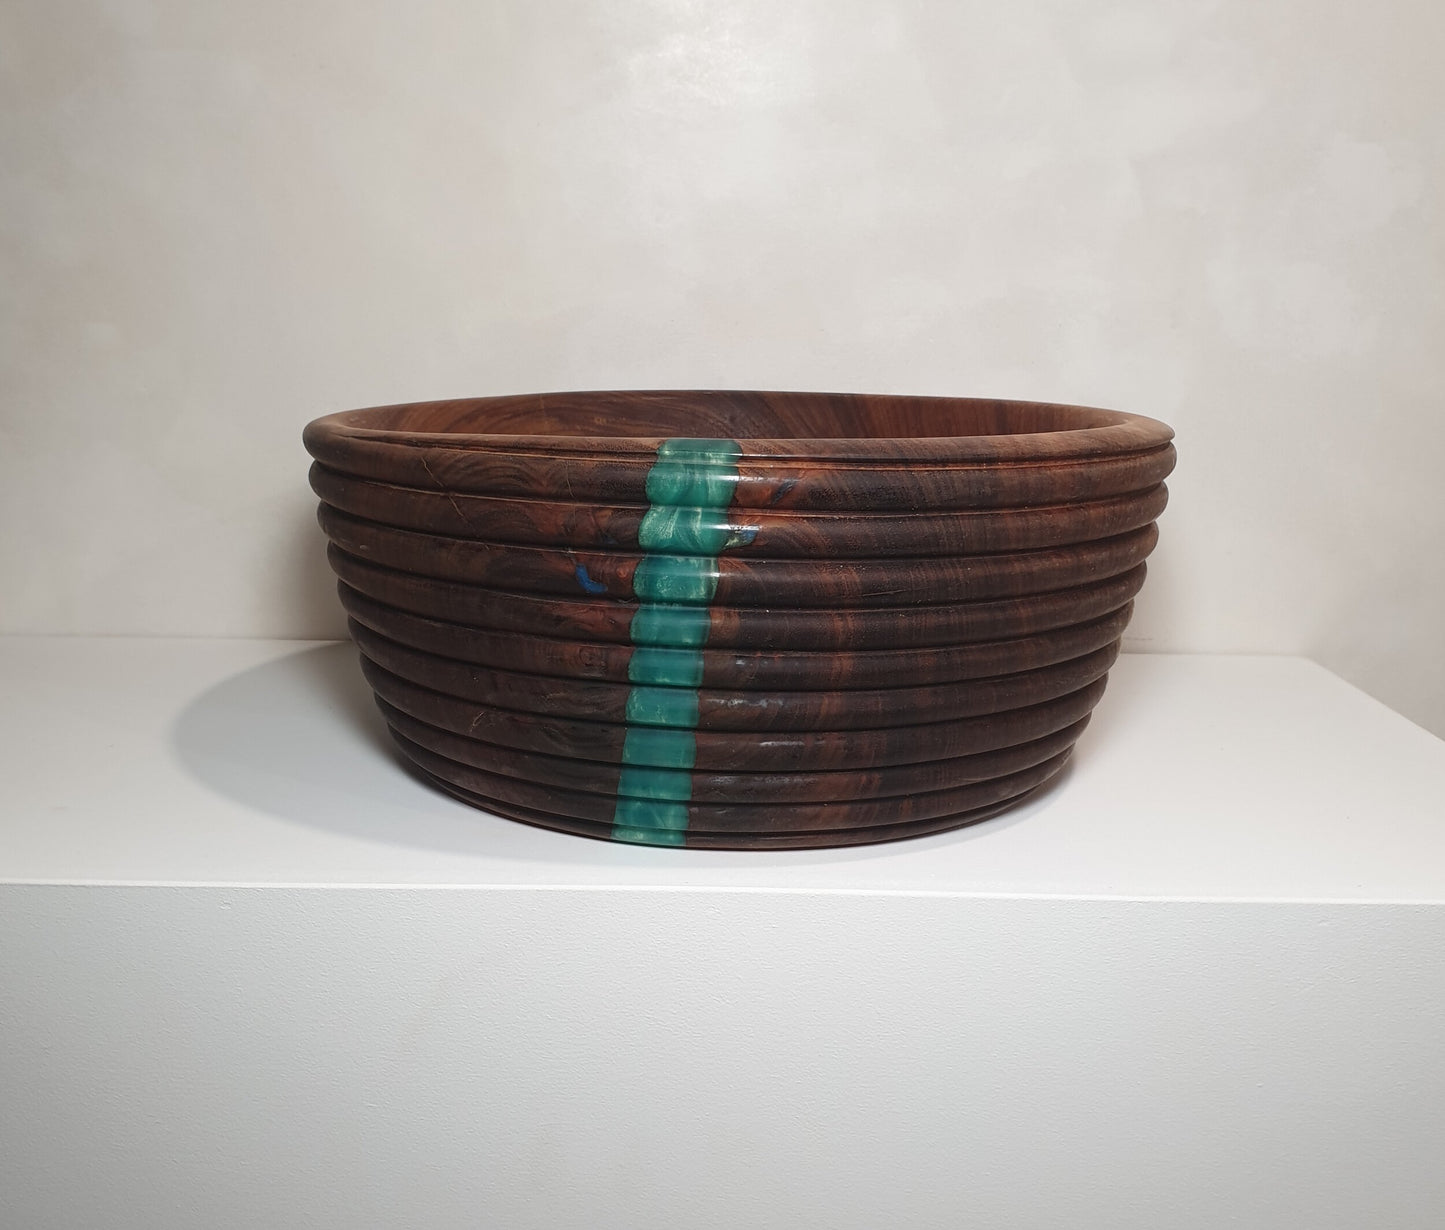 Sally Wattle Beaded Beehive Bowl with Teal Resin